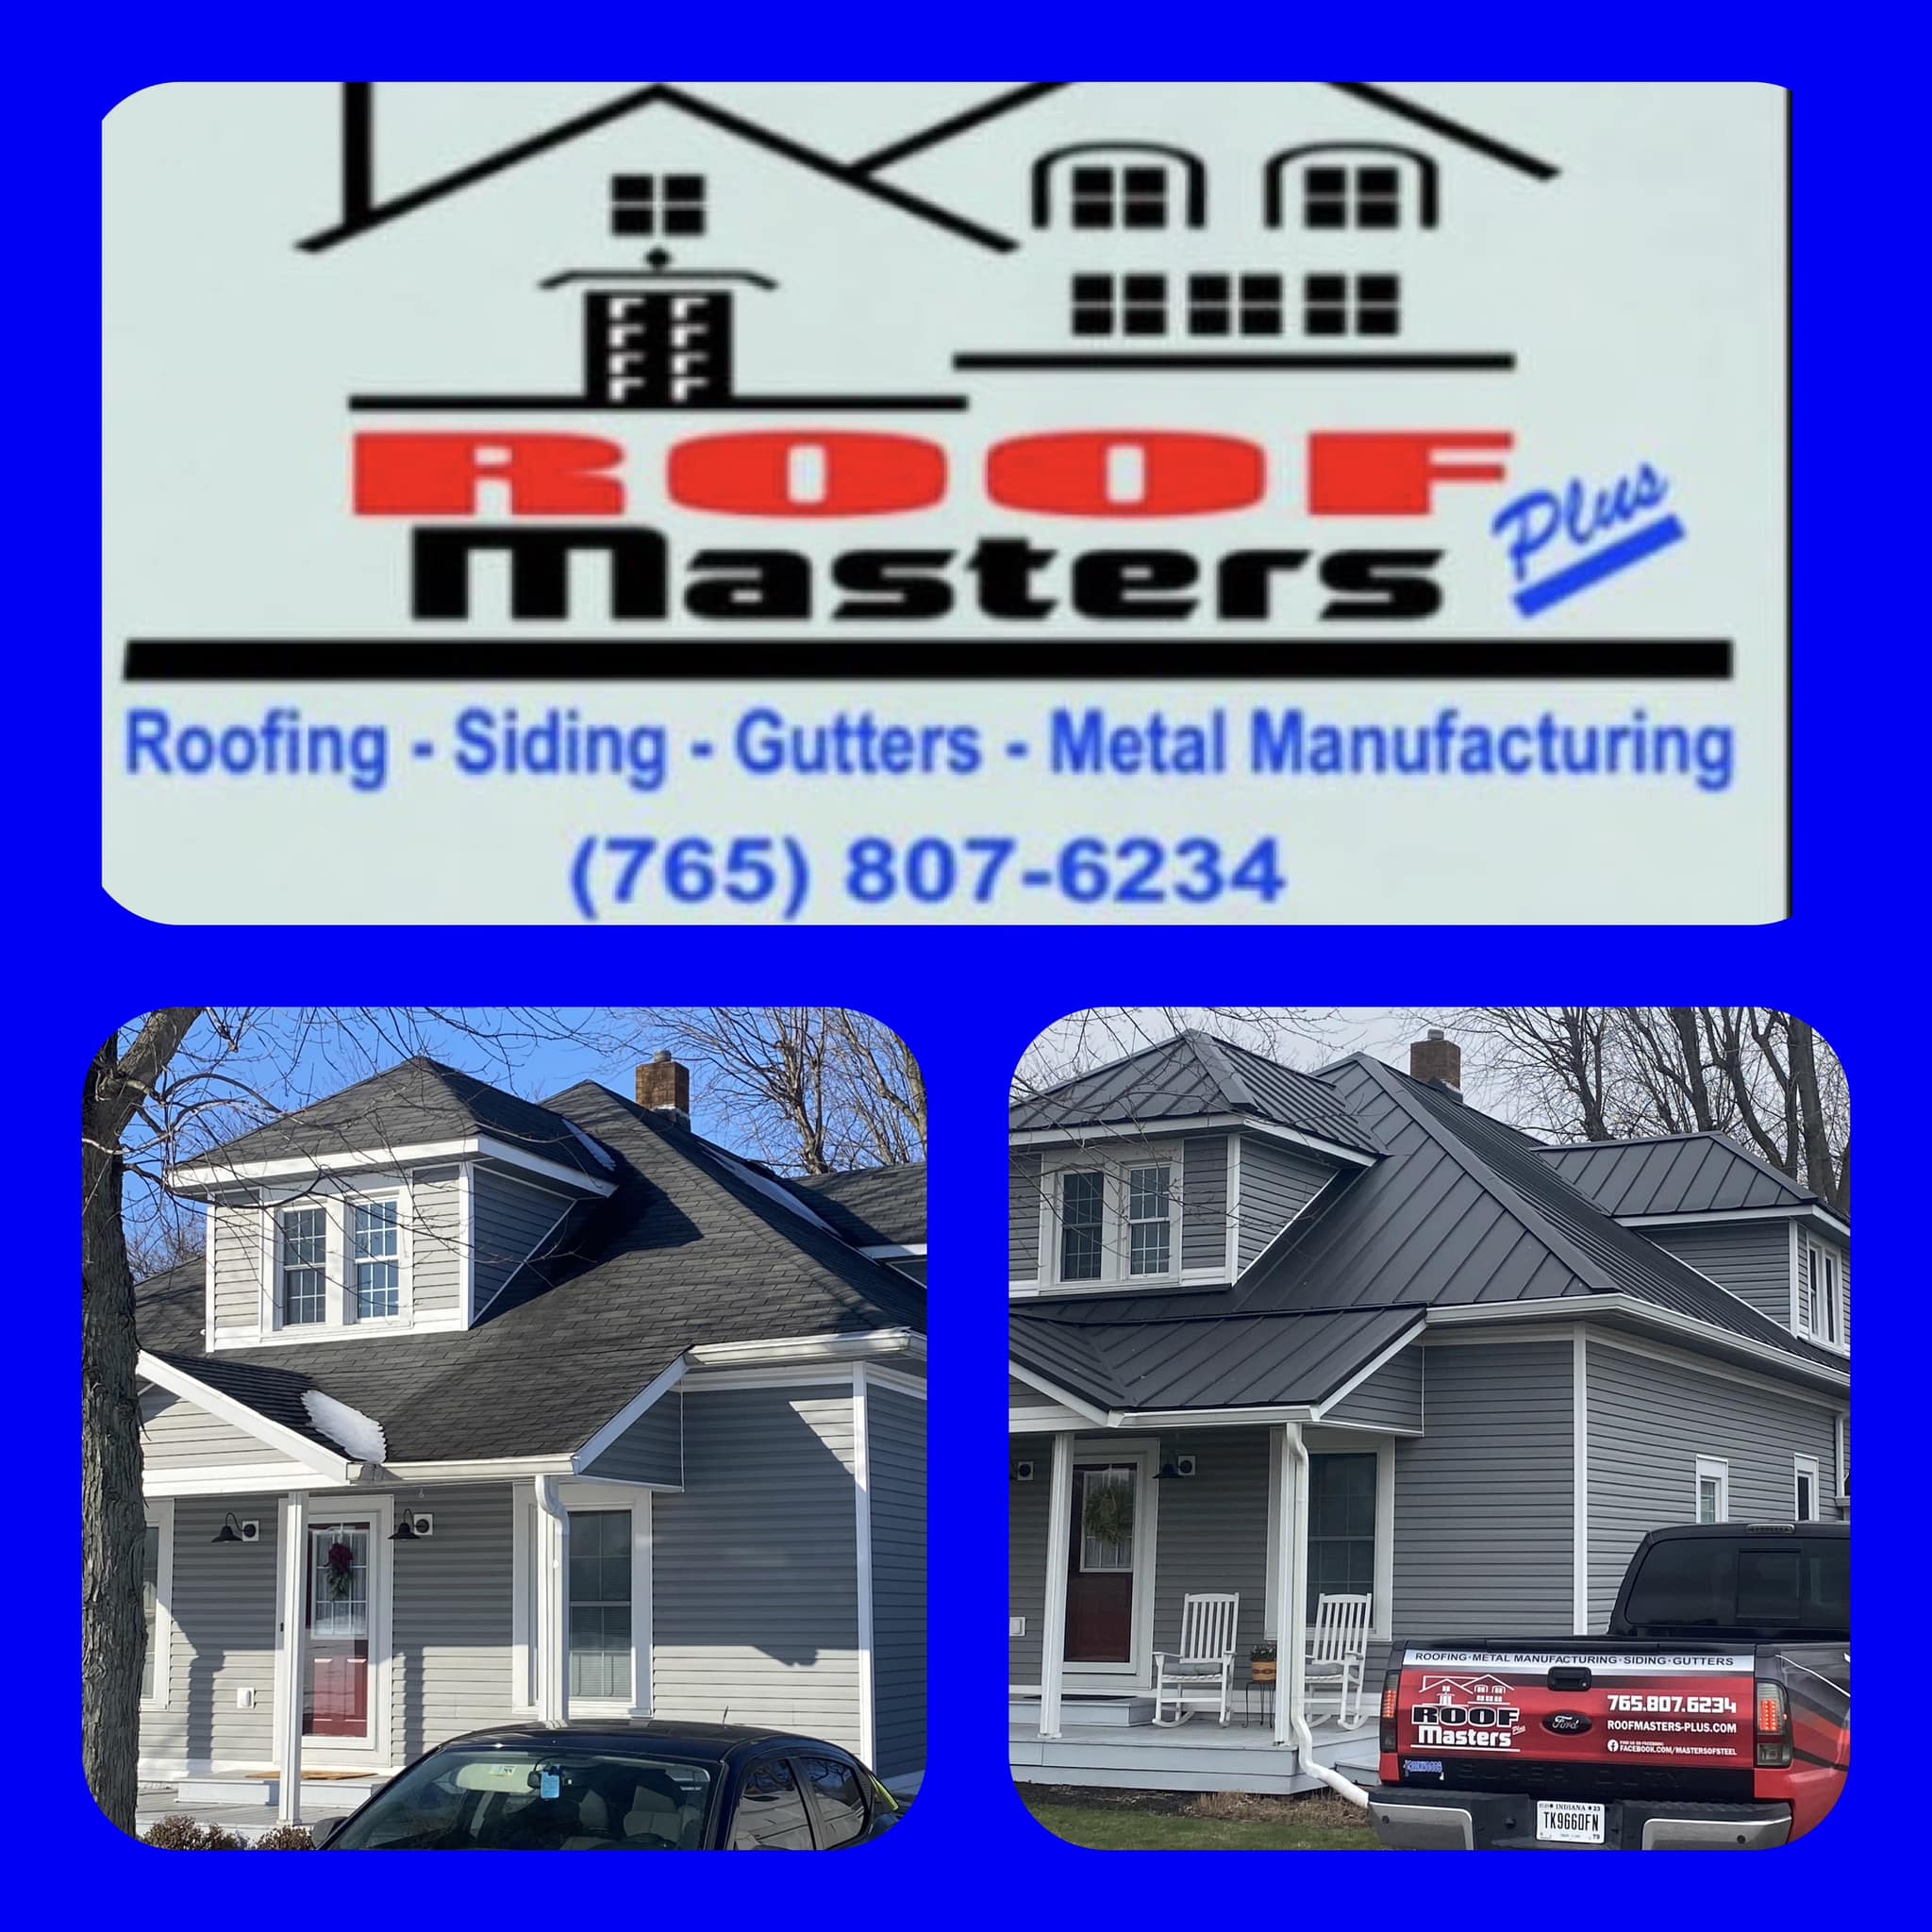 Roof Masters Plus 7800 W 650 S, West Point Indiana 47992